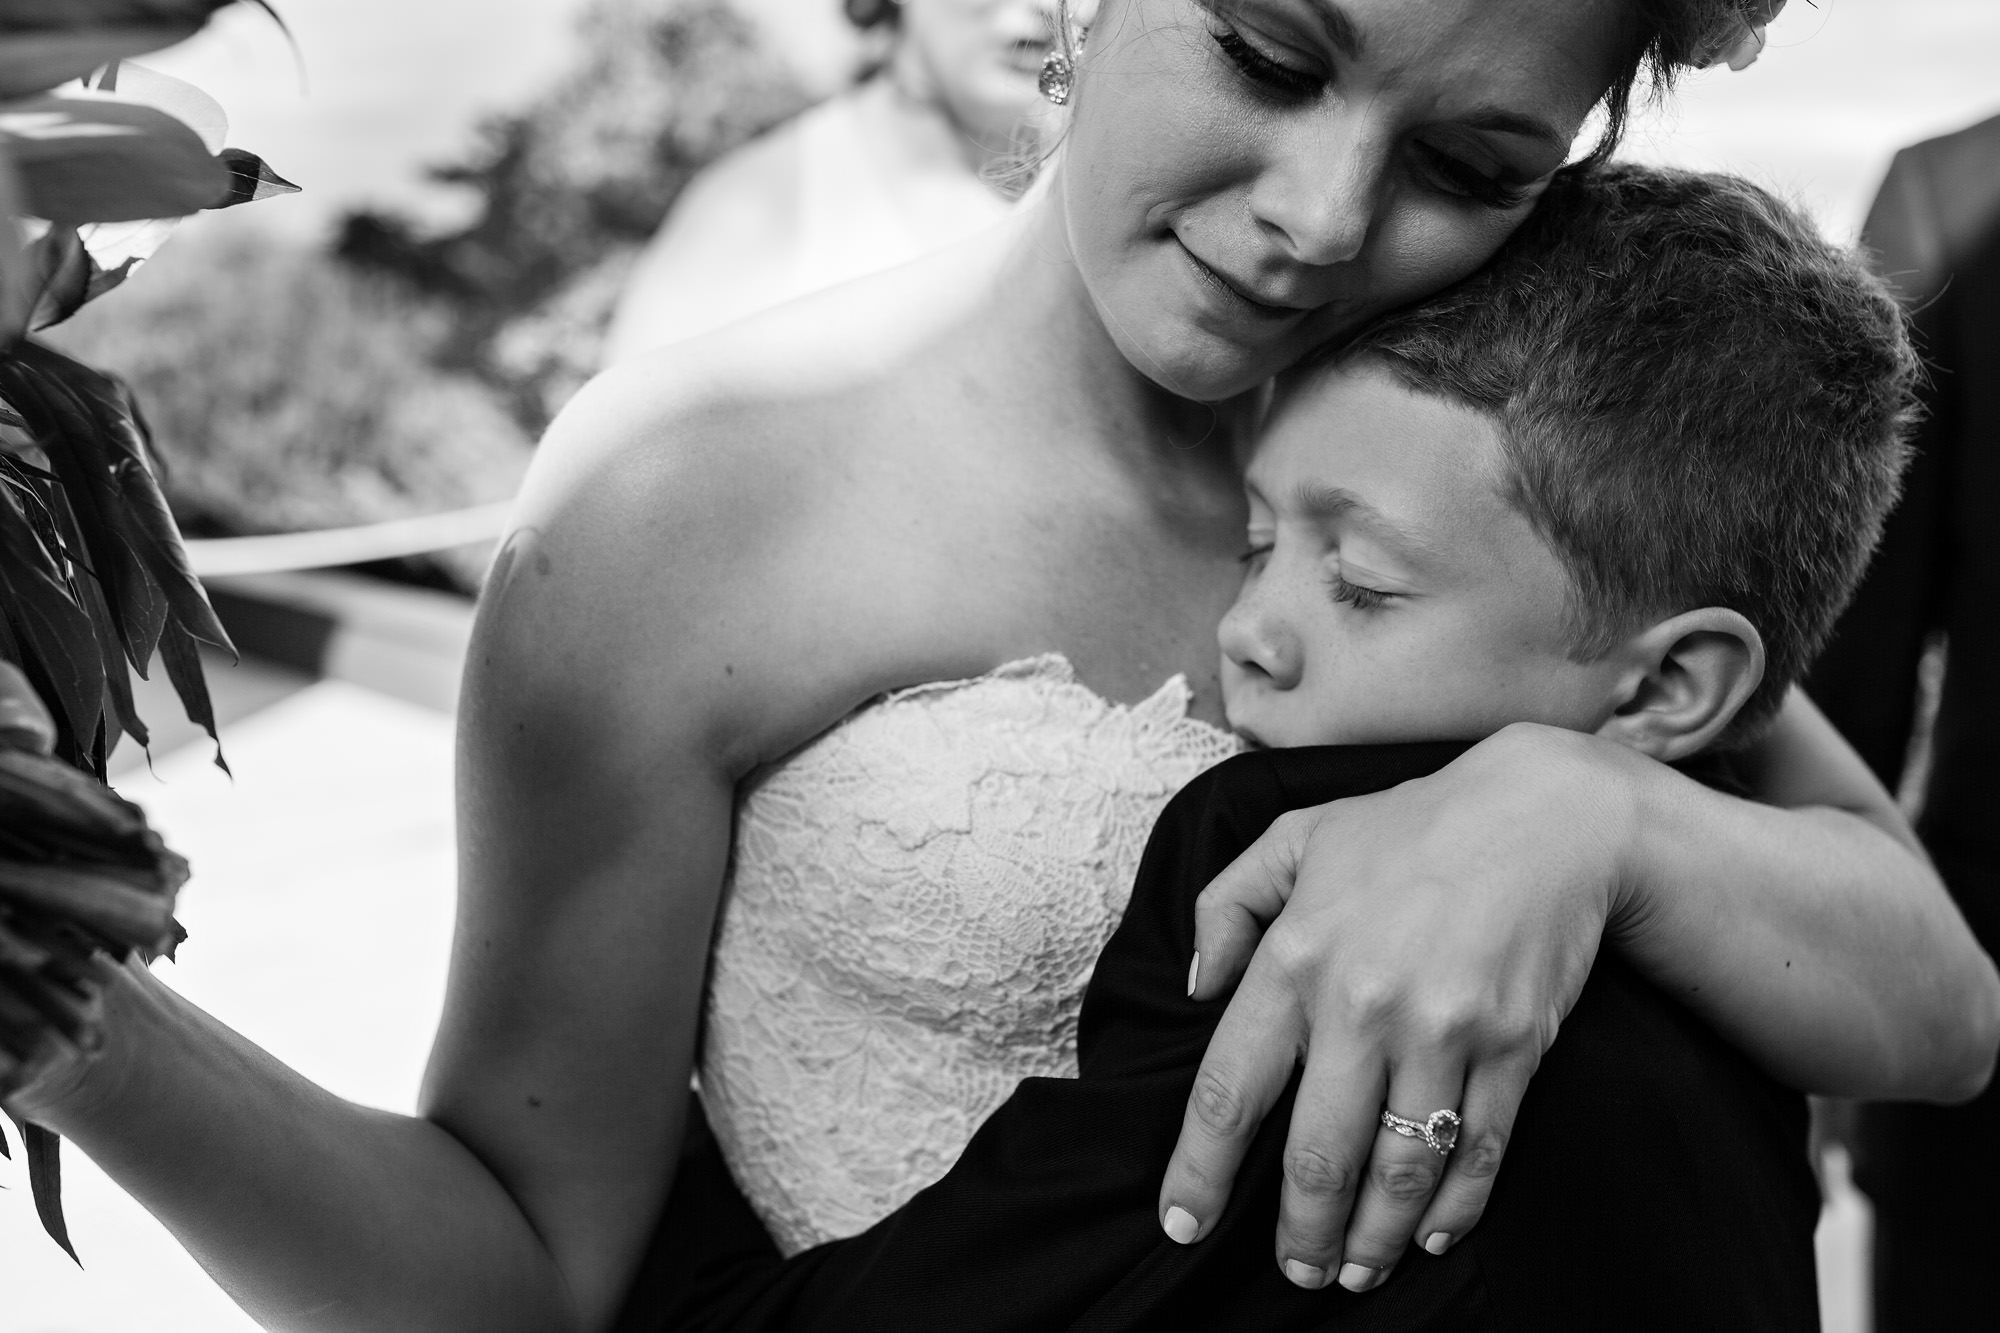 An emotional moment with a bride and her son at a Maine wedding.